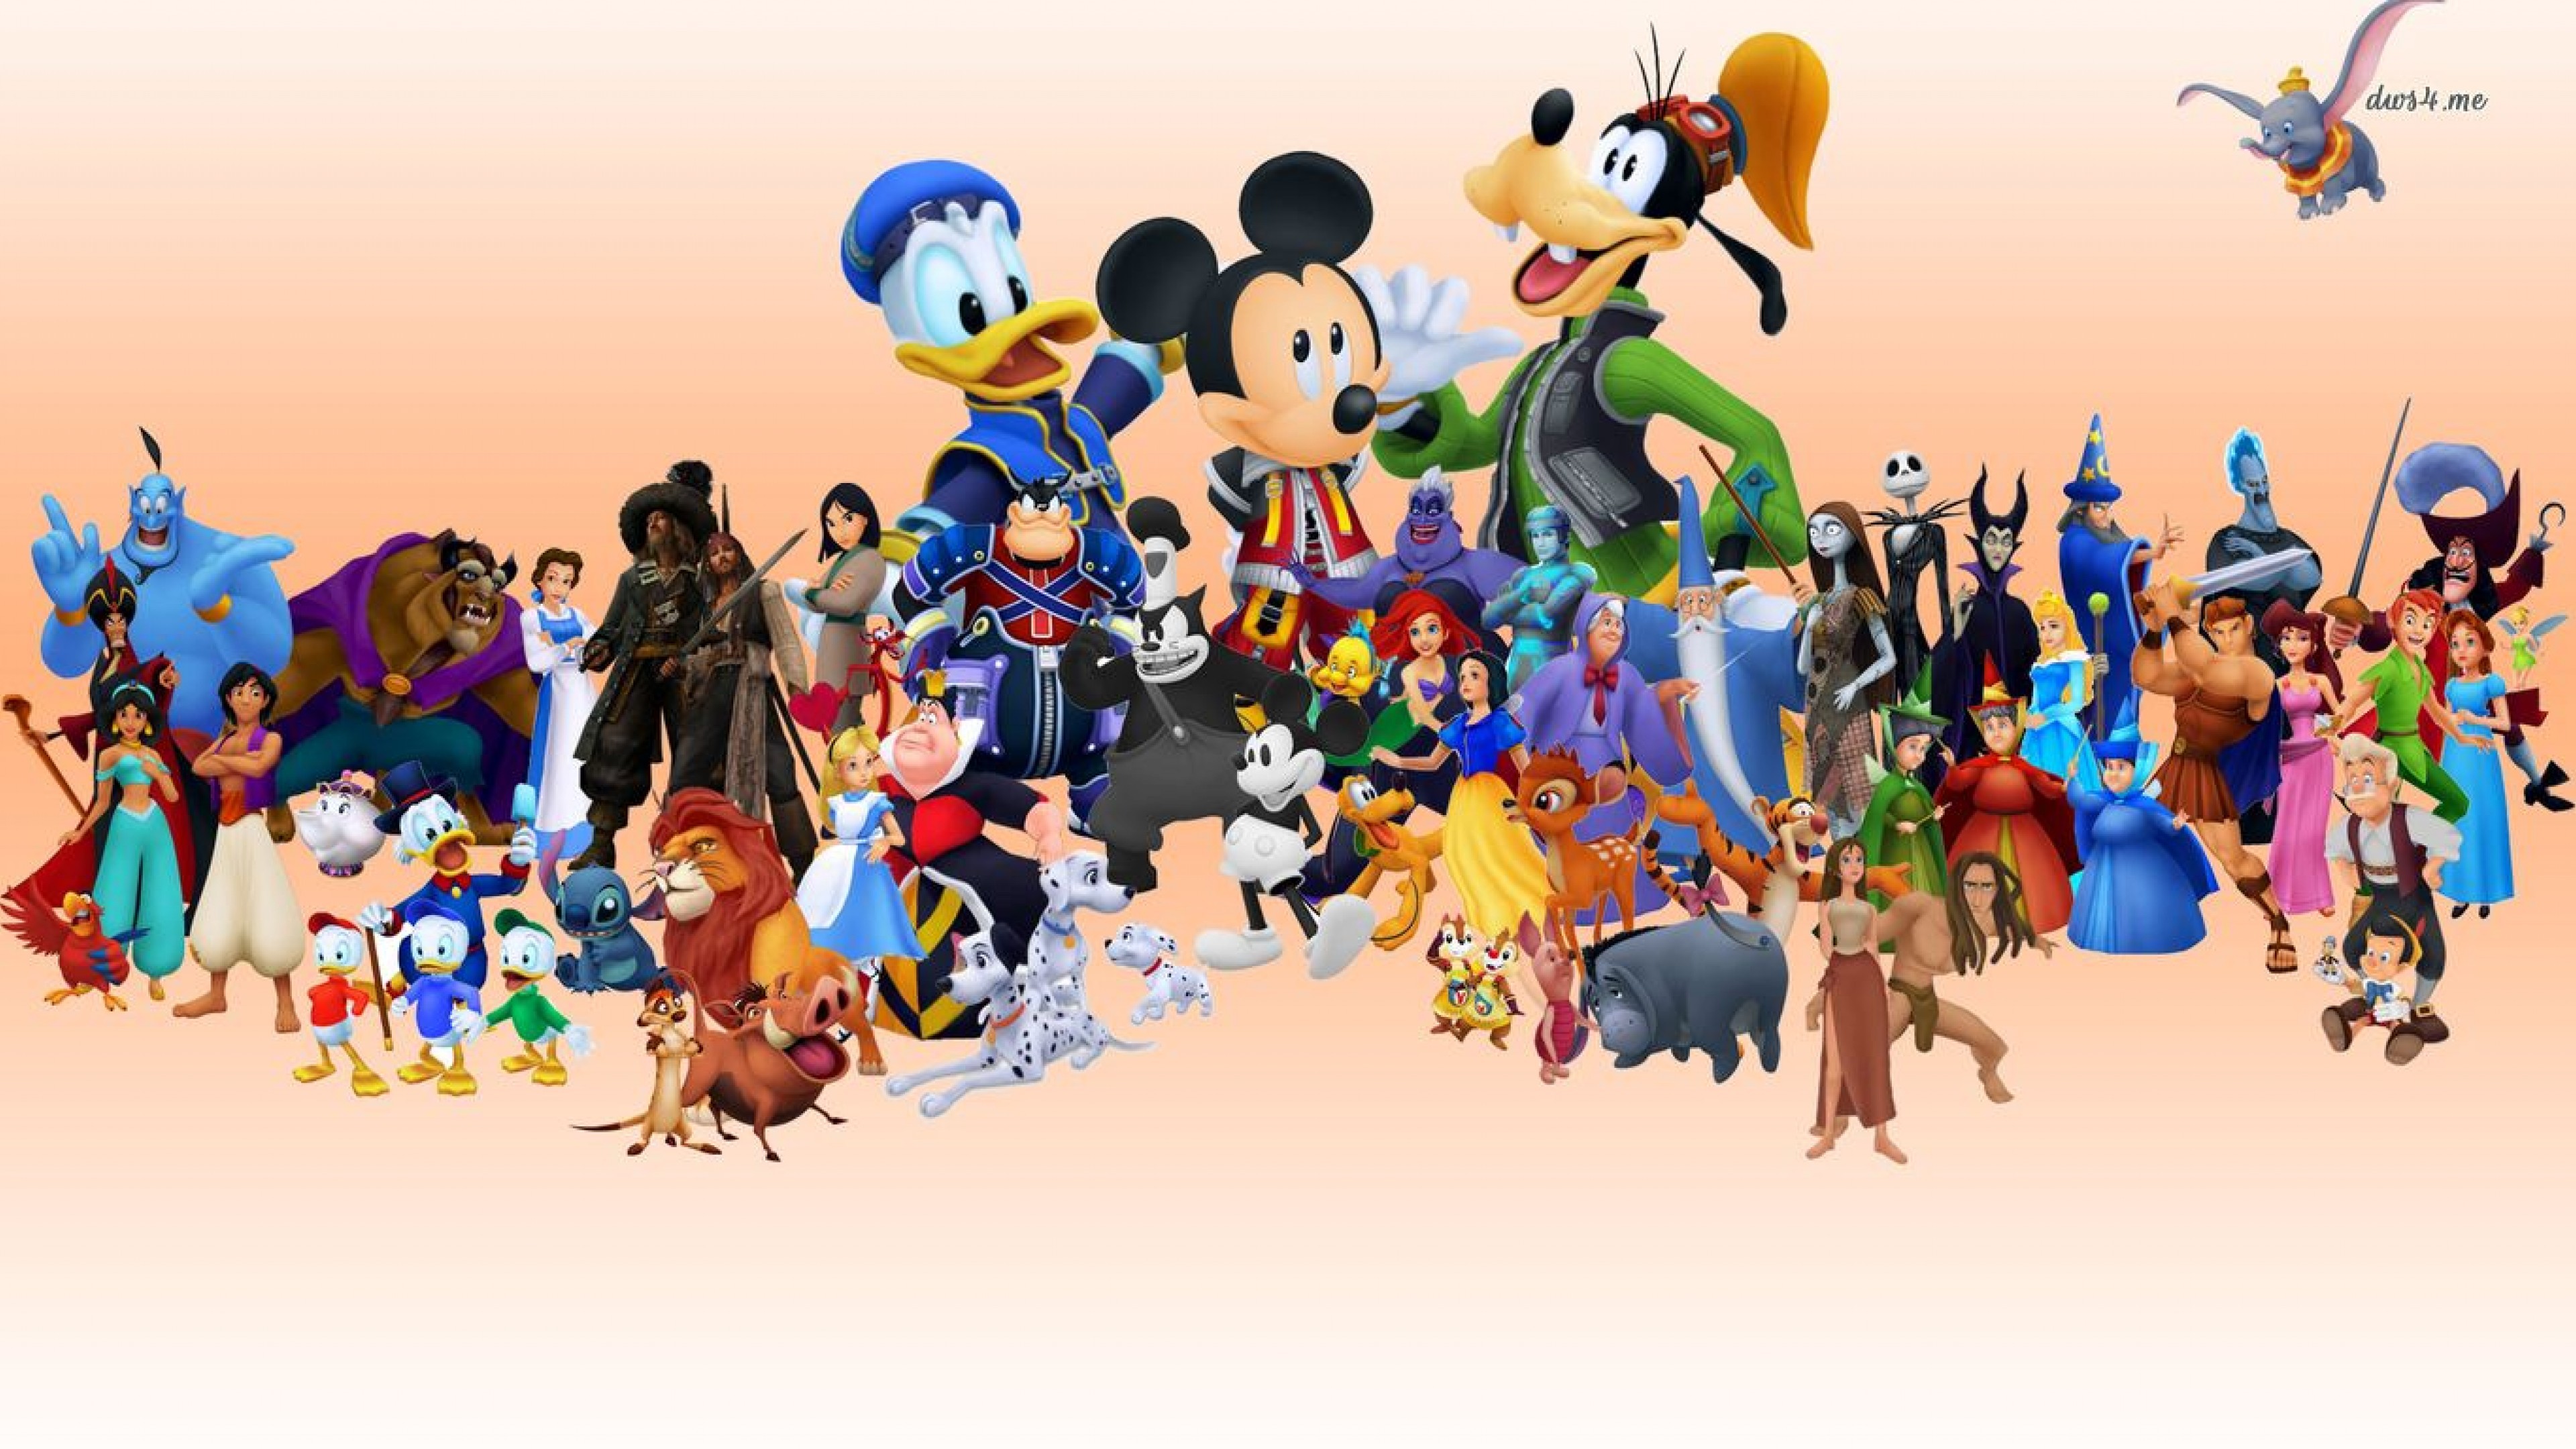 3840x2160 Disney World Characters Hd Wallpaper for Desktop and Mobiles - 4K Ultra HD